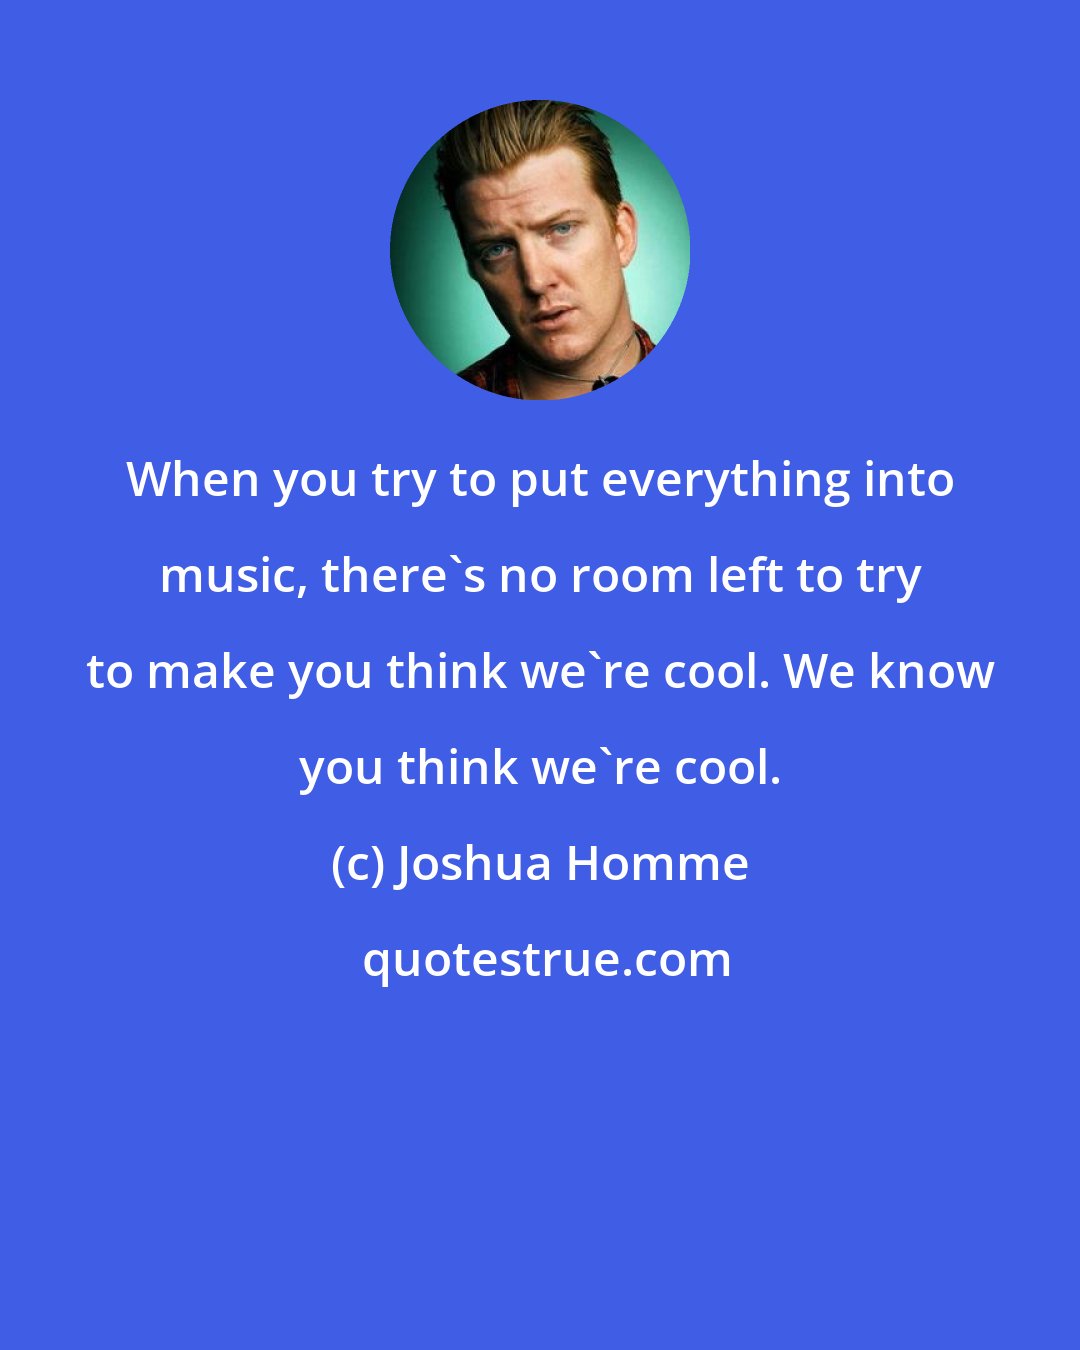 Joshua Homme: When you try to put everything into music, there's no room left to try to make you think we're cool. We know you think we're cool.